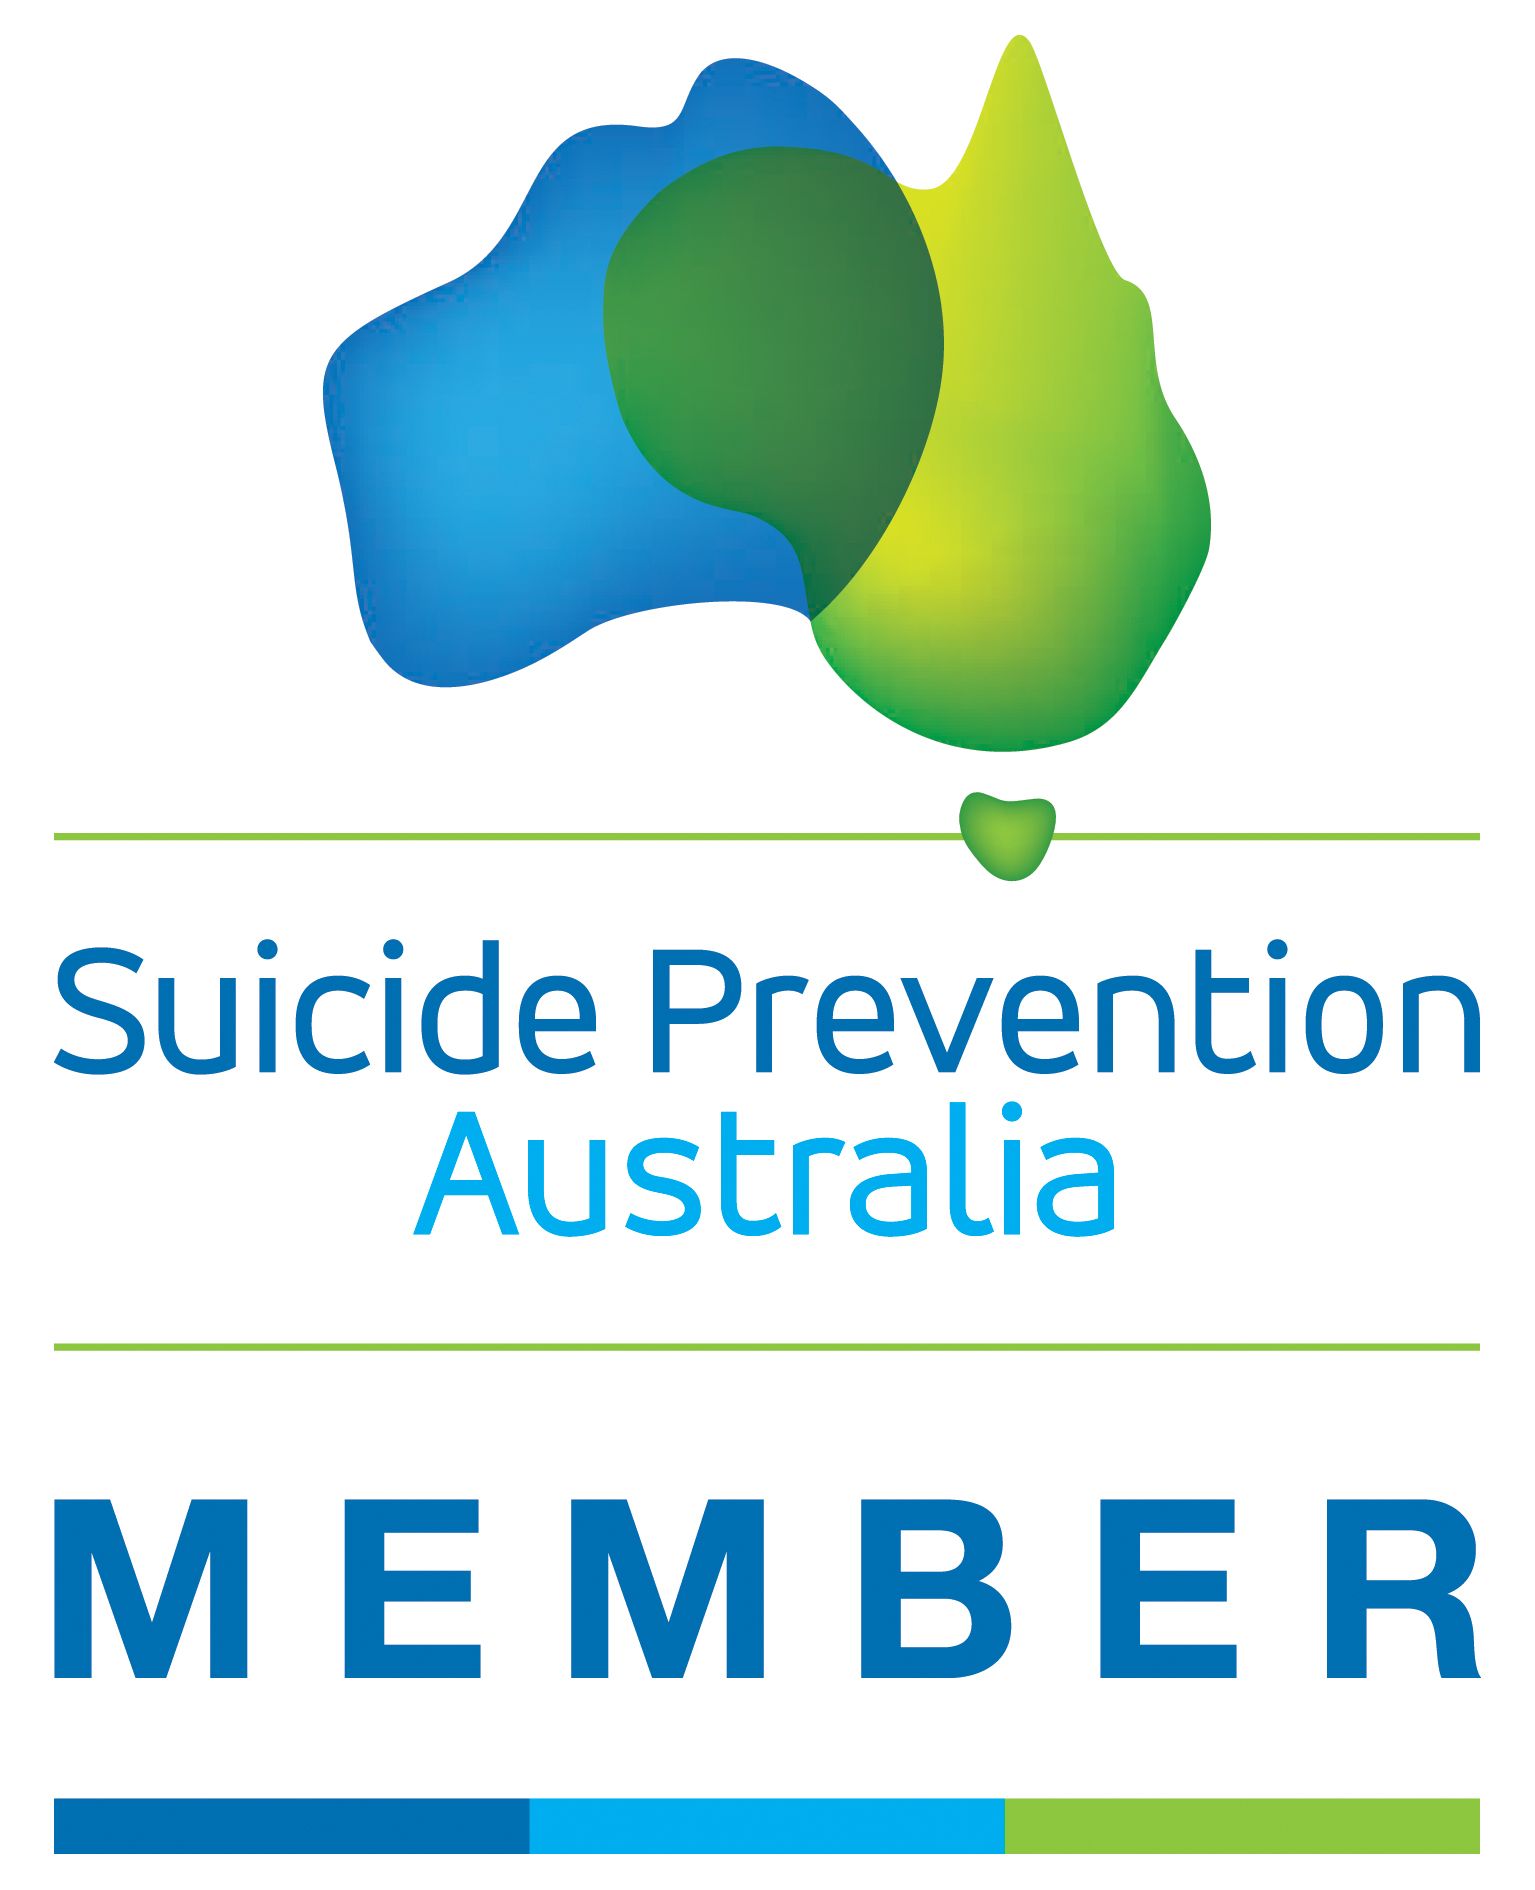 A green and blue image of Australia with the words Suicide Prevention Australia Member underneath